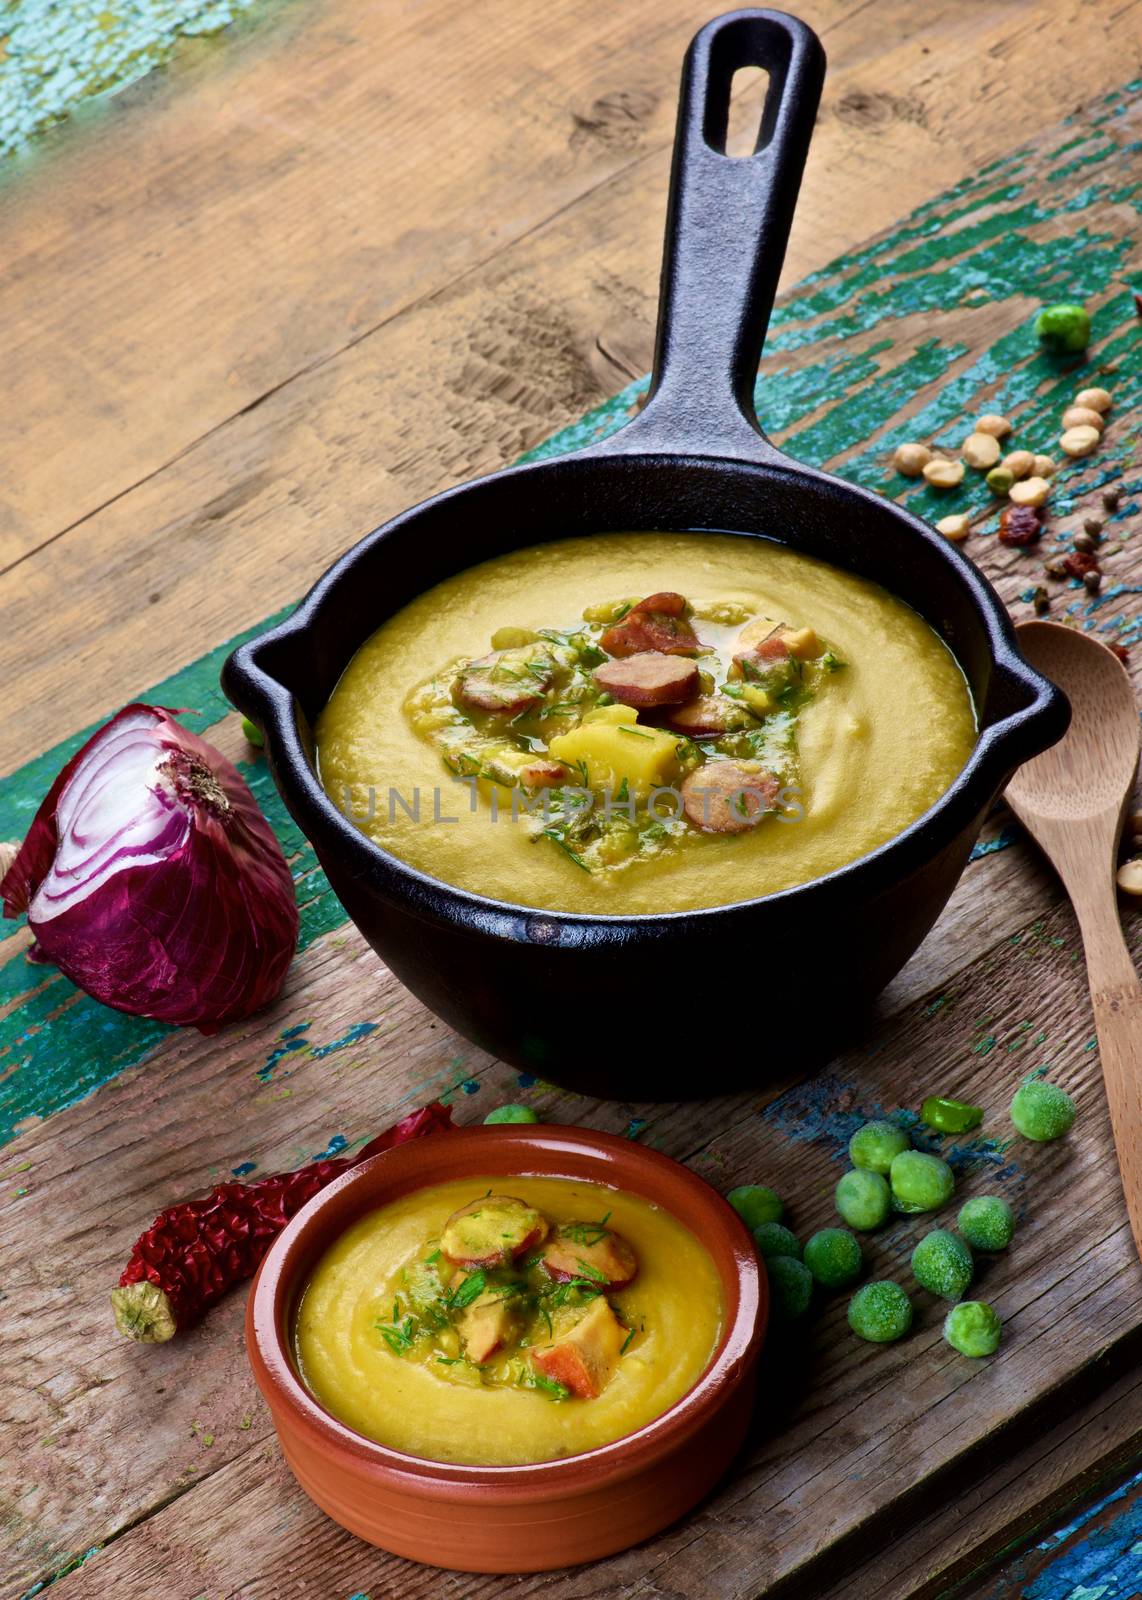 Pea Soup with Smoked Sausages by zhekos